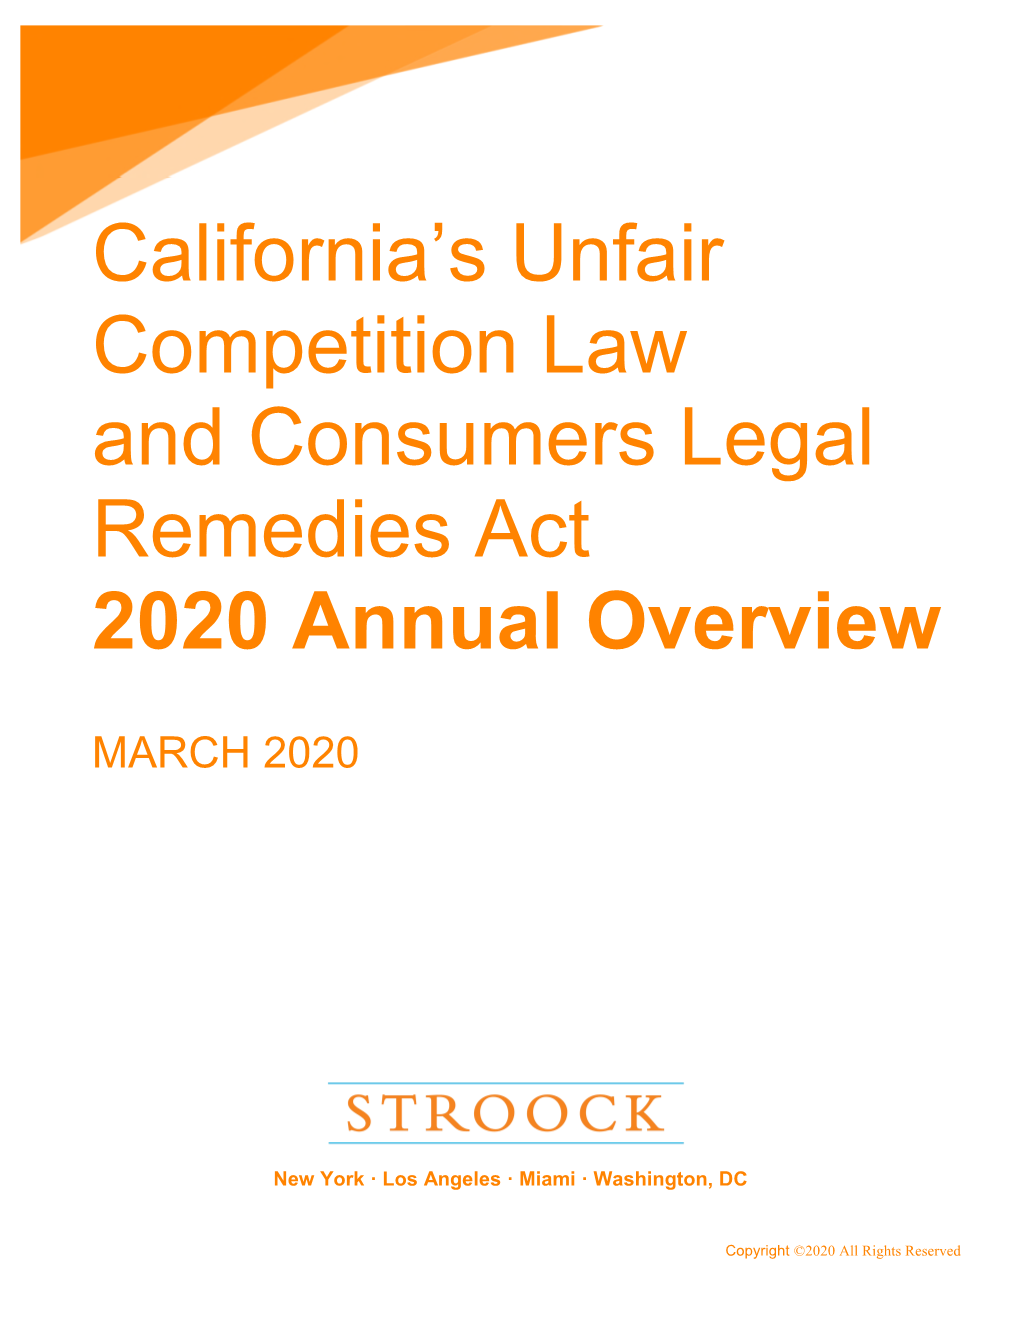 An Overview of California's Unfair Competition